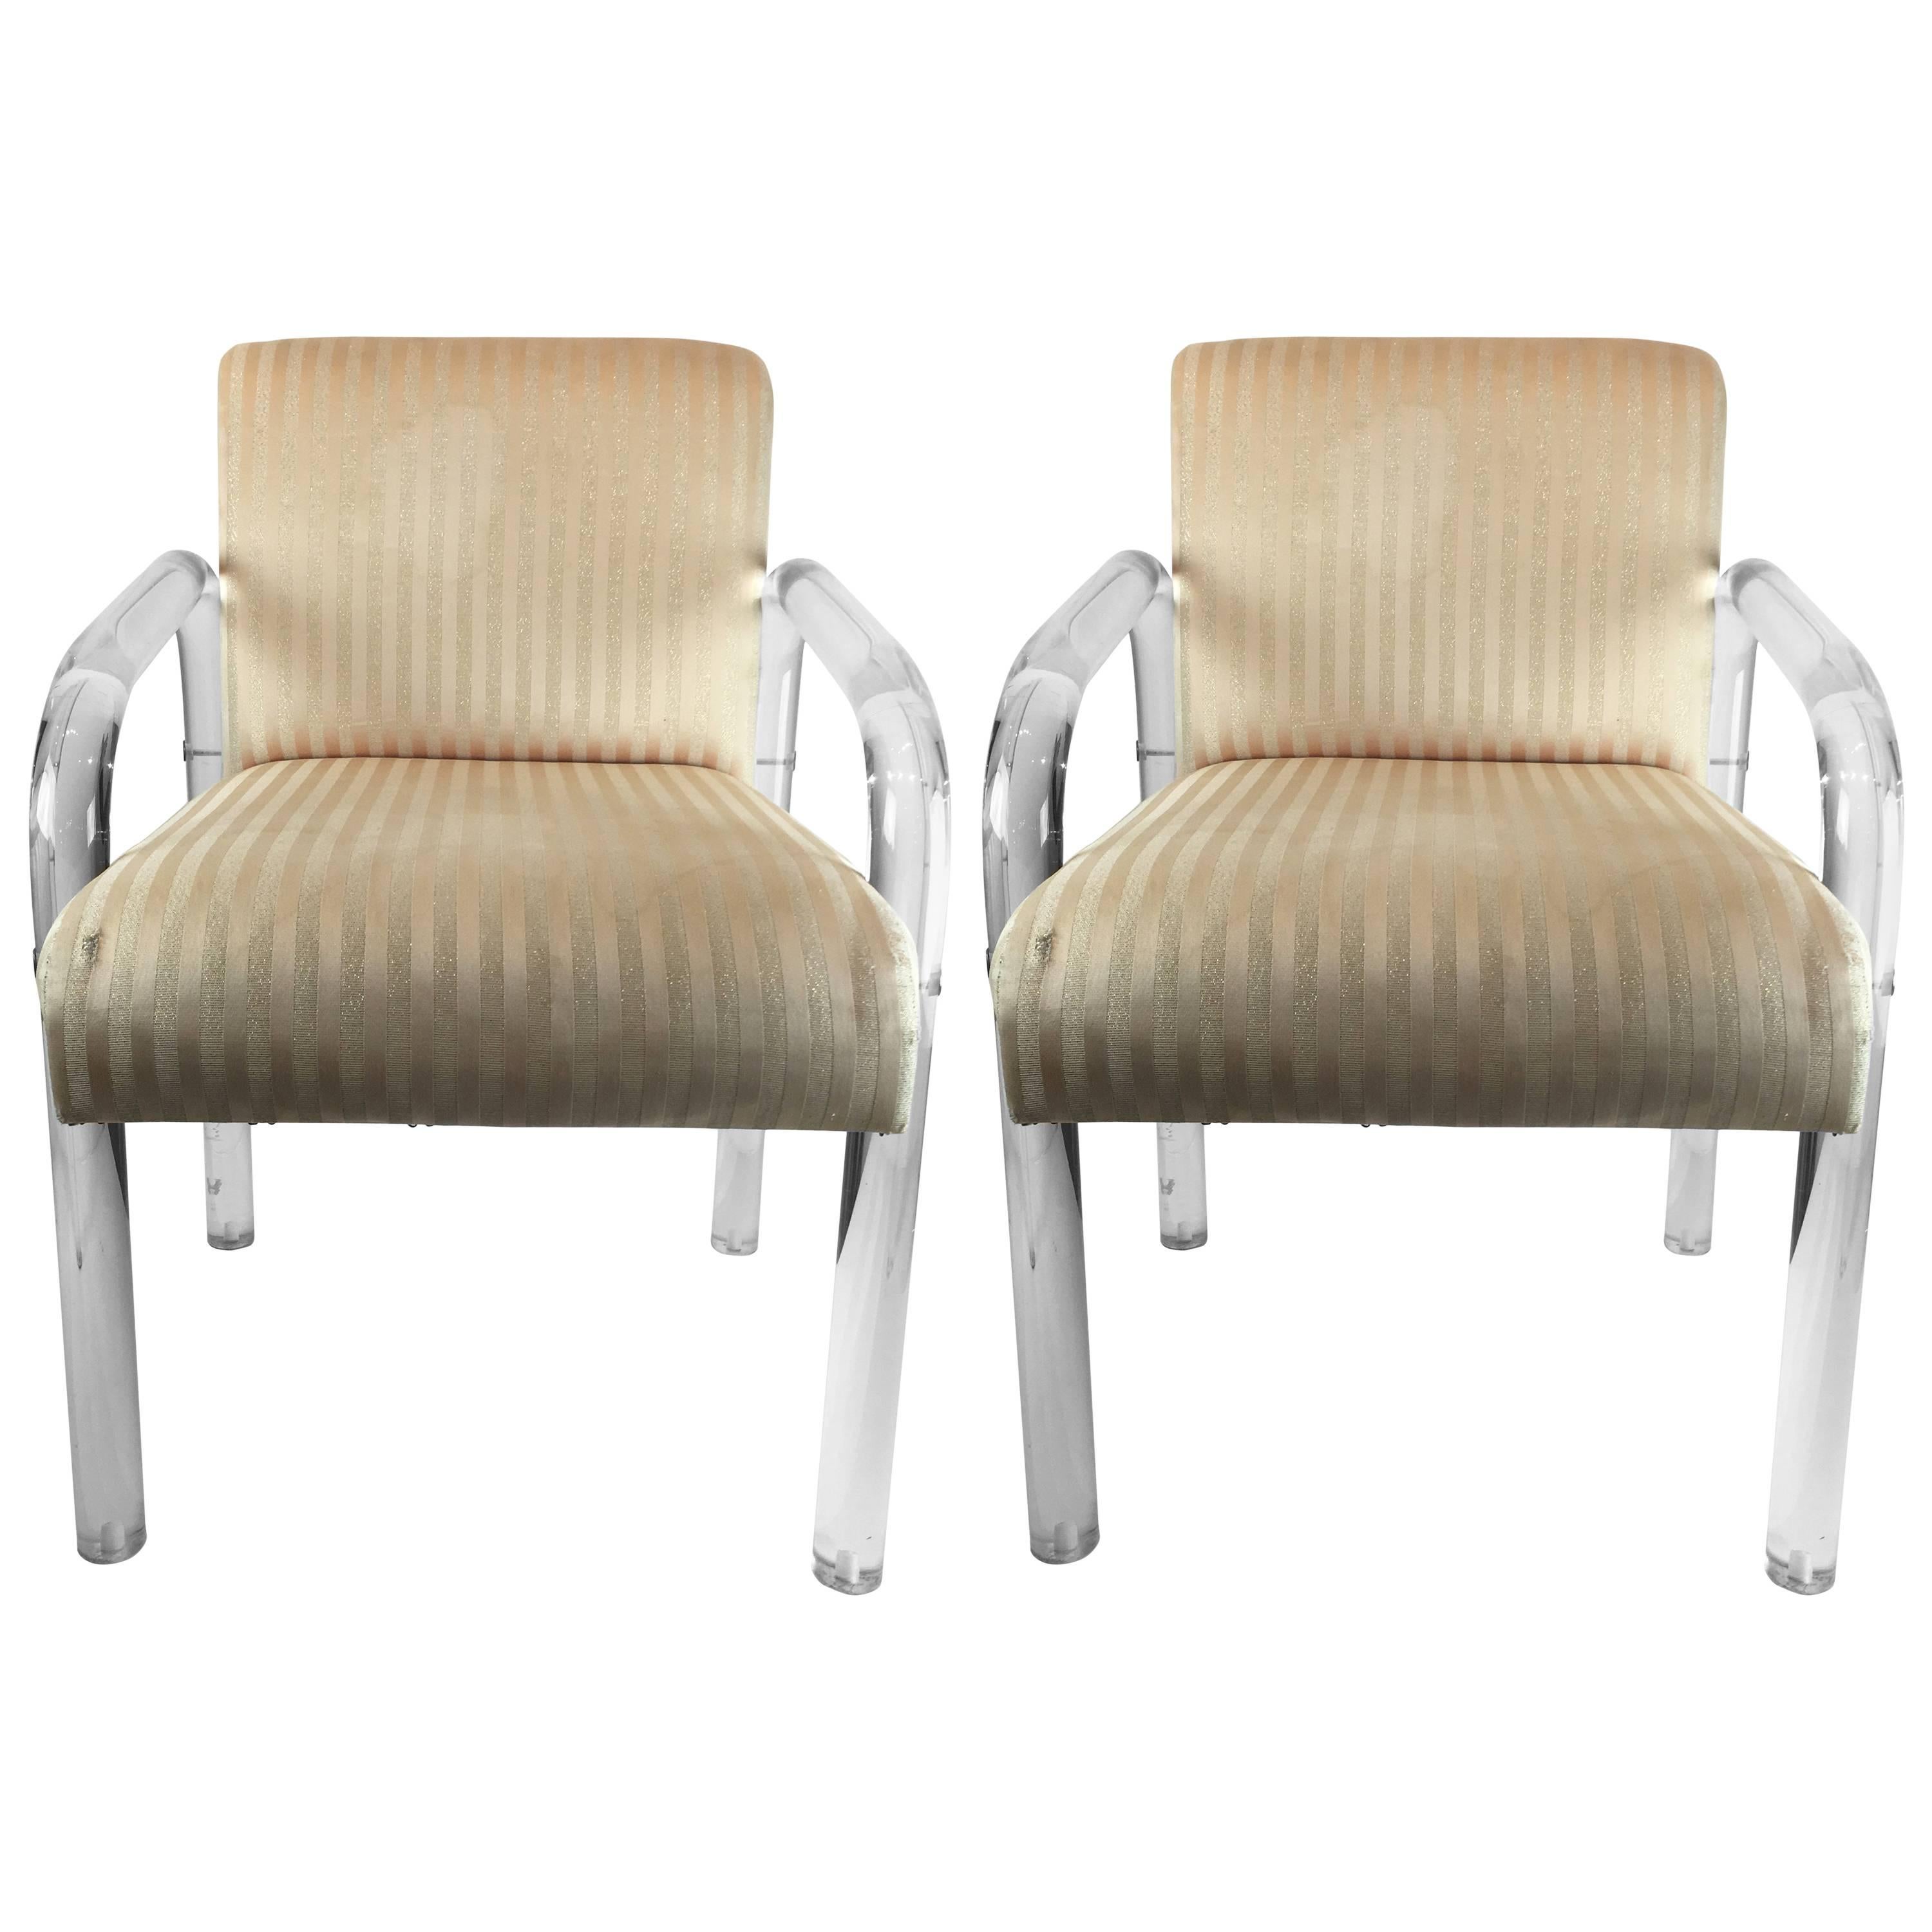 Vintage Pair of Lucite Child Chairs, 1970s